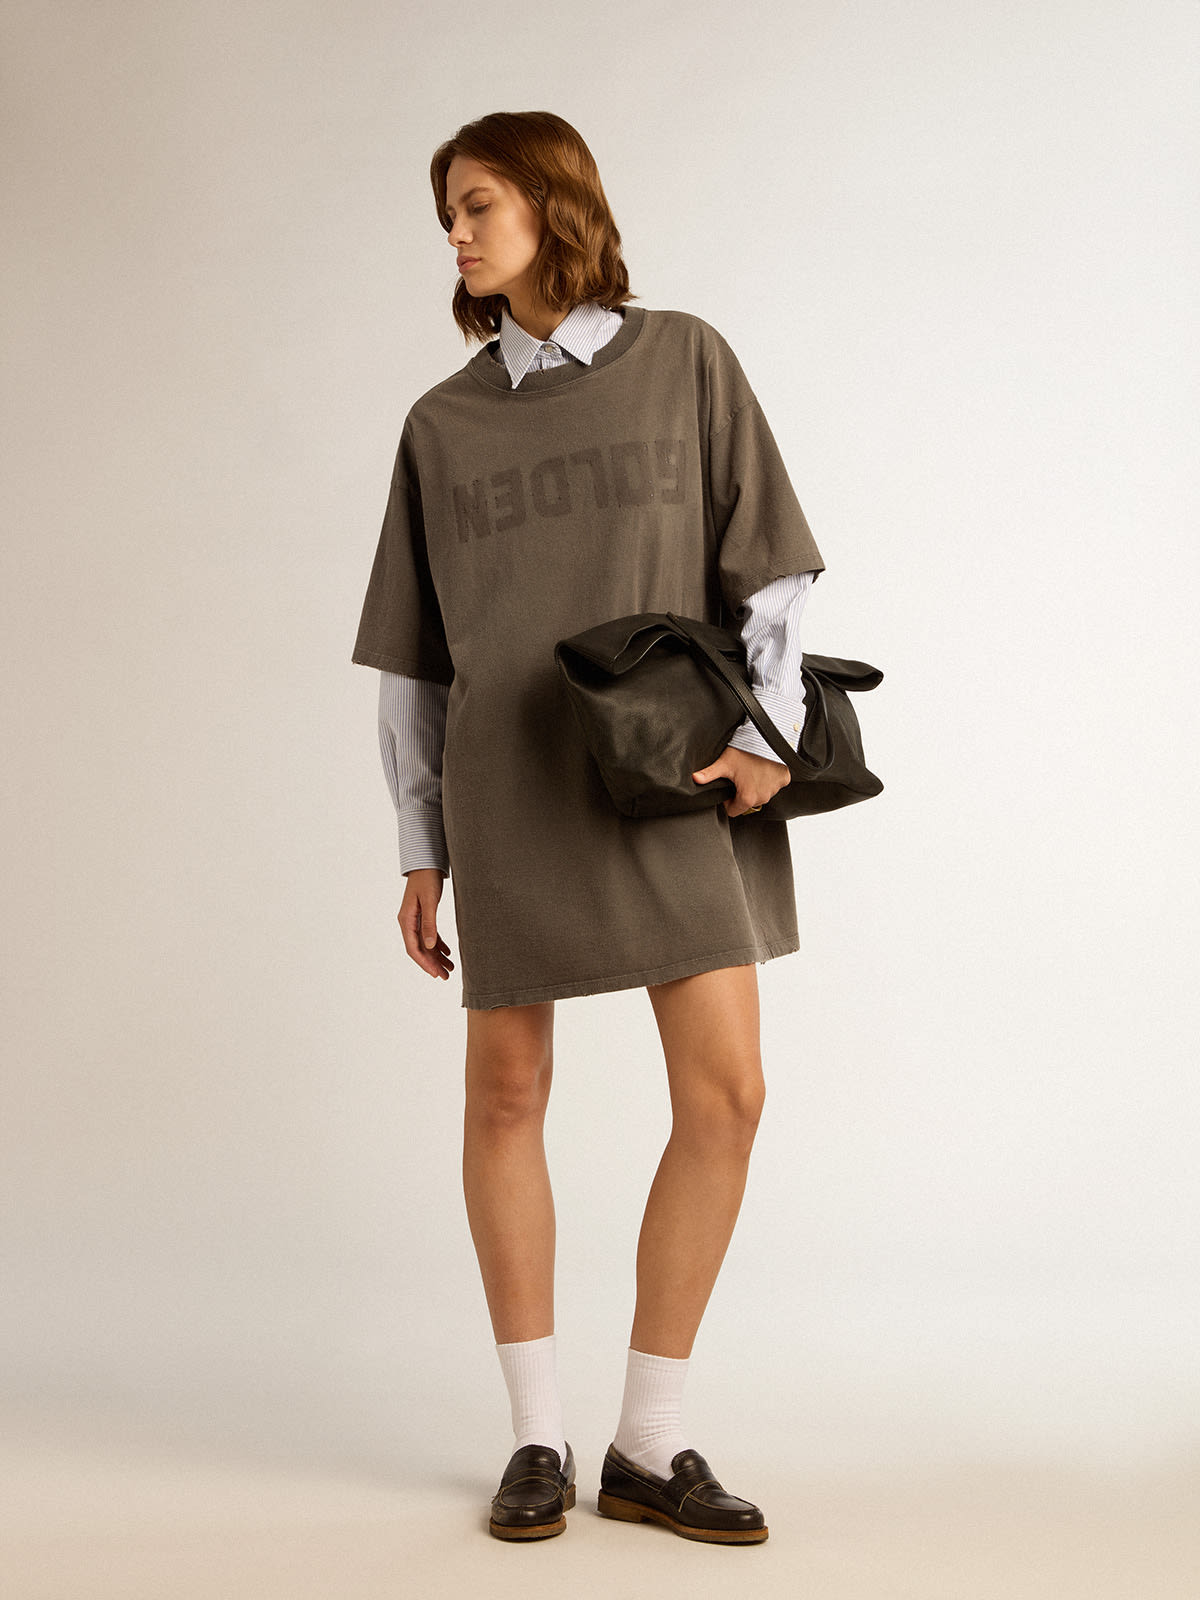 Golden Goose - Women's gray T-shirt dress with distressed treatment in 